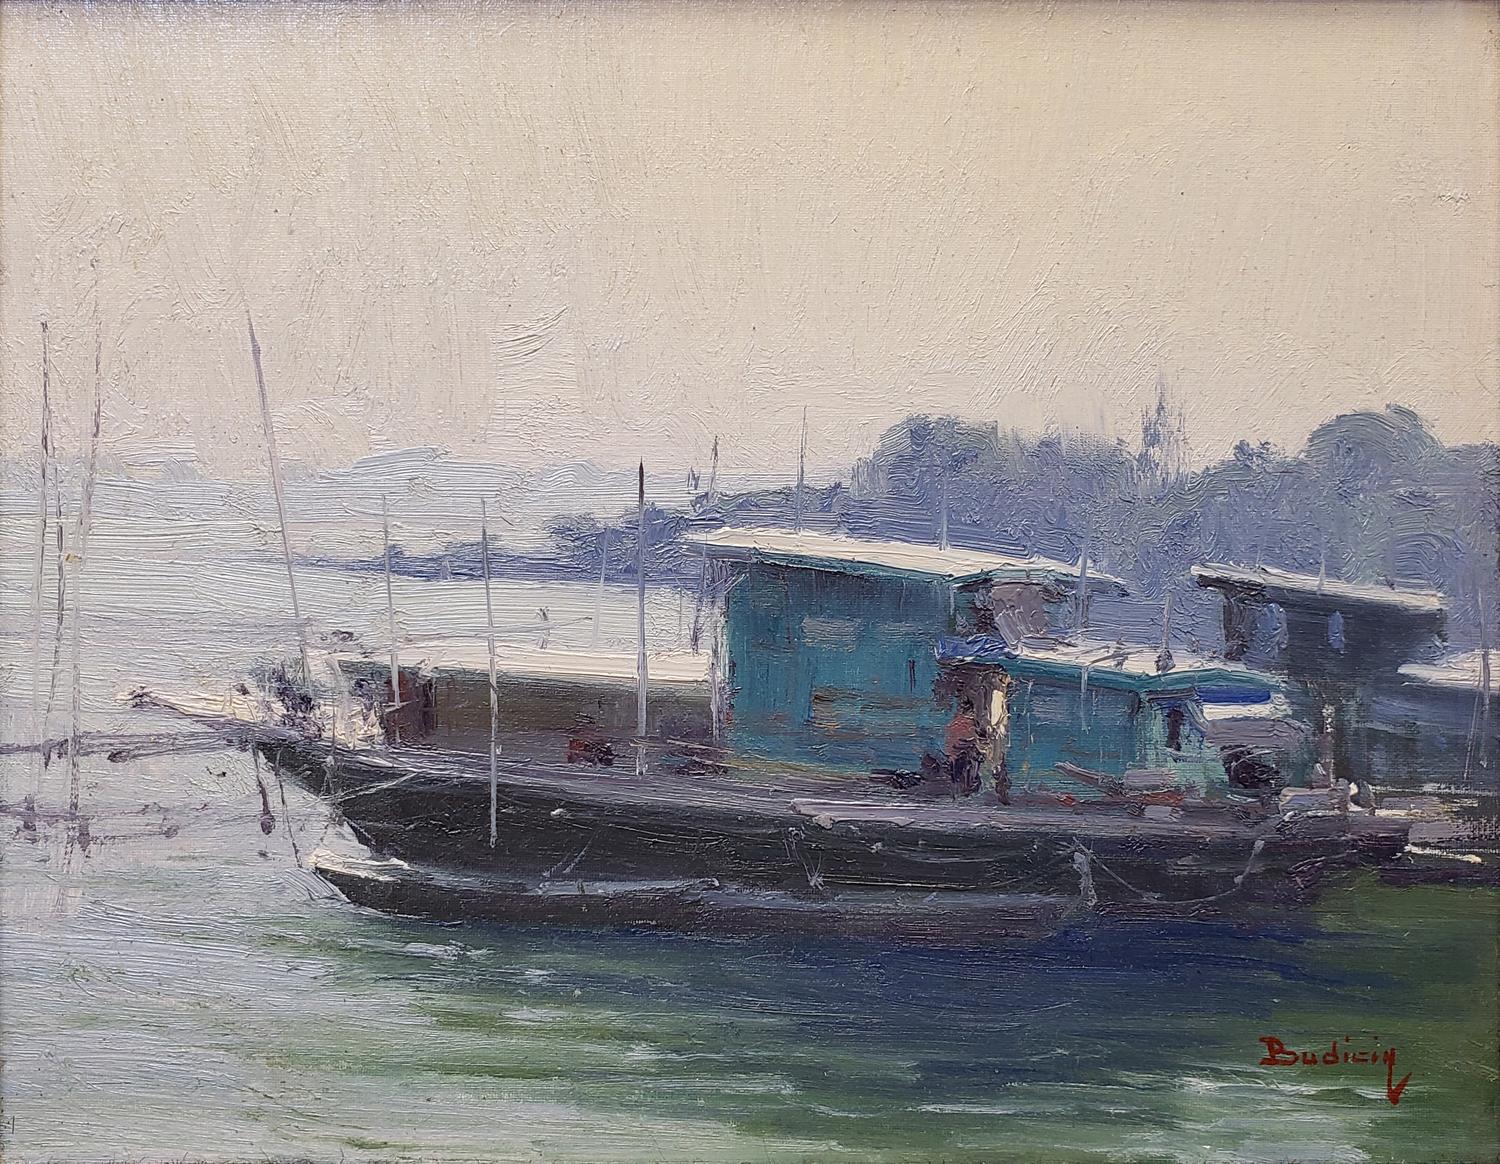 Life On The River - Painting by John Budicin